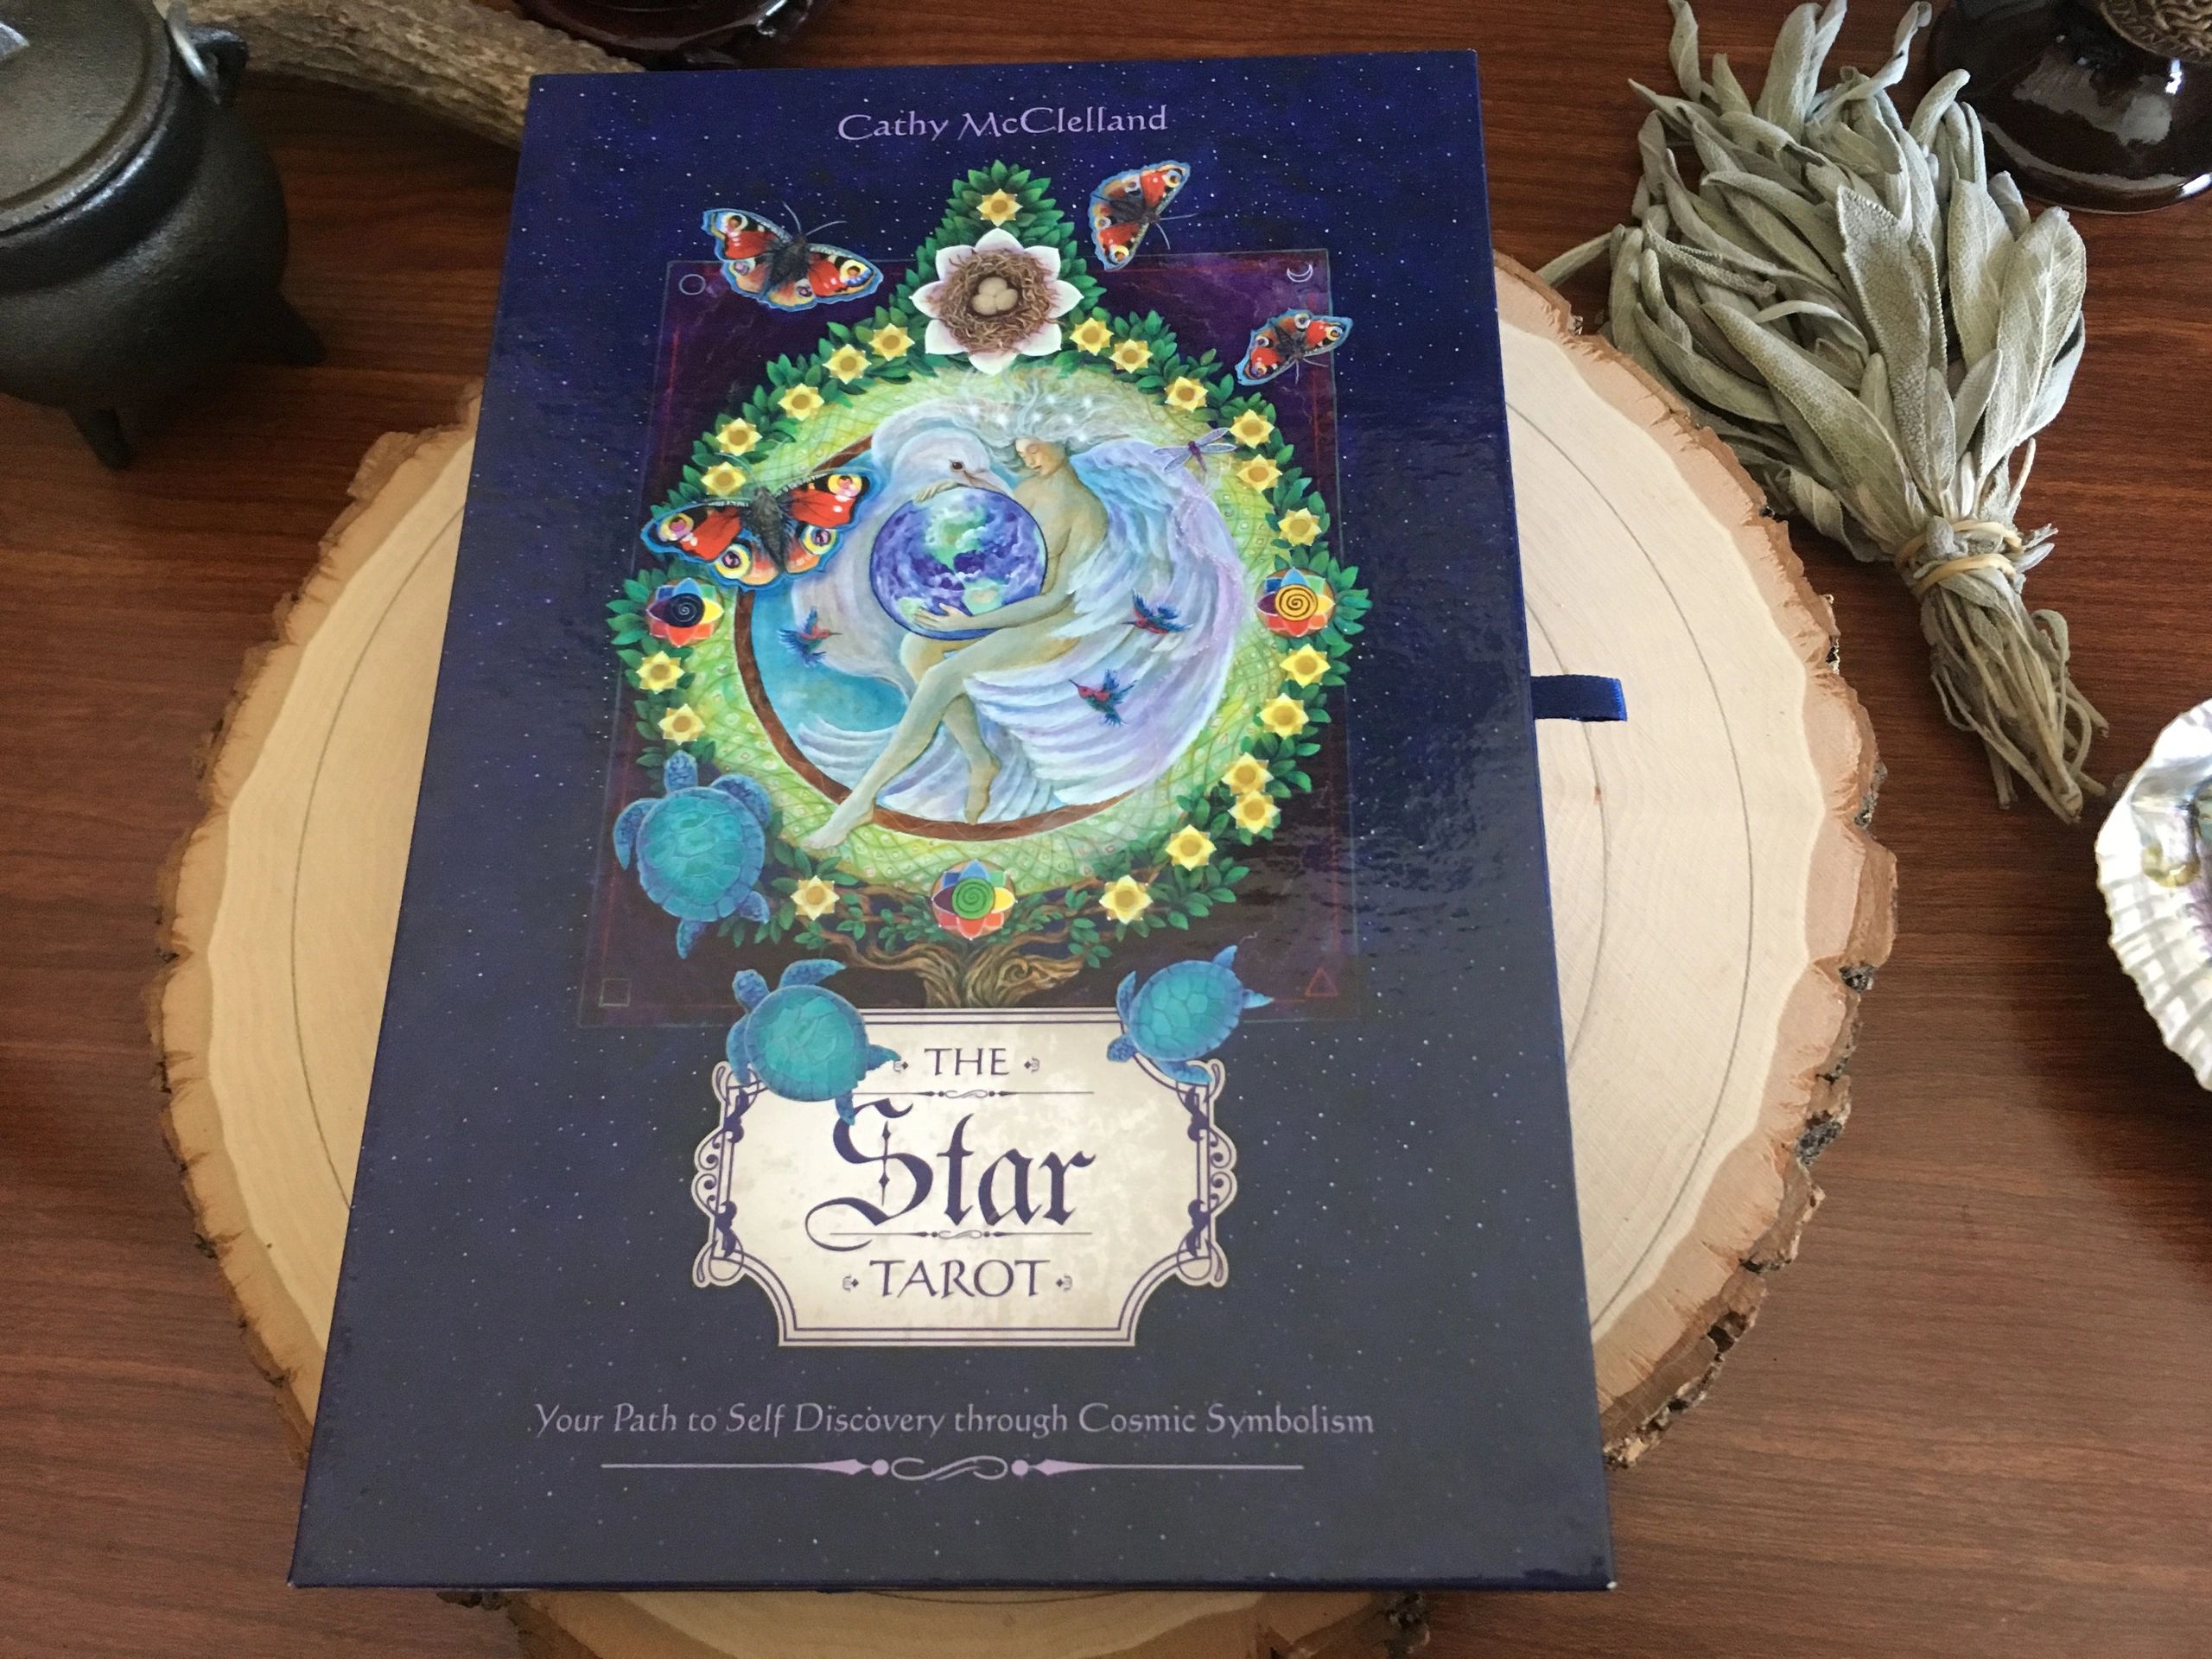 Tarot Deck Review - "The Star Tarot" by Cathy McClelland